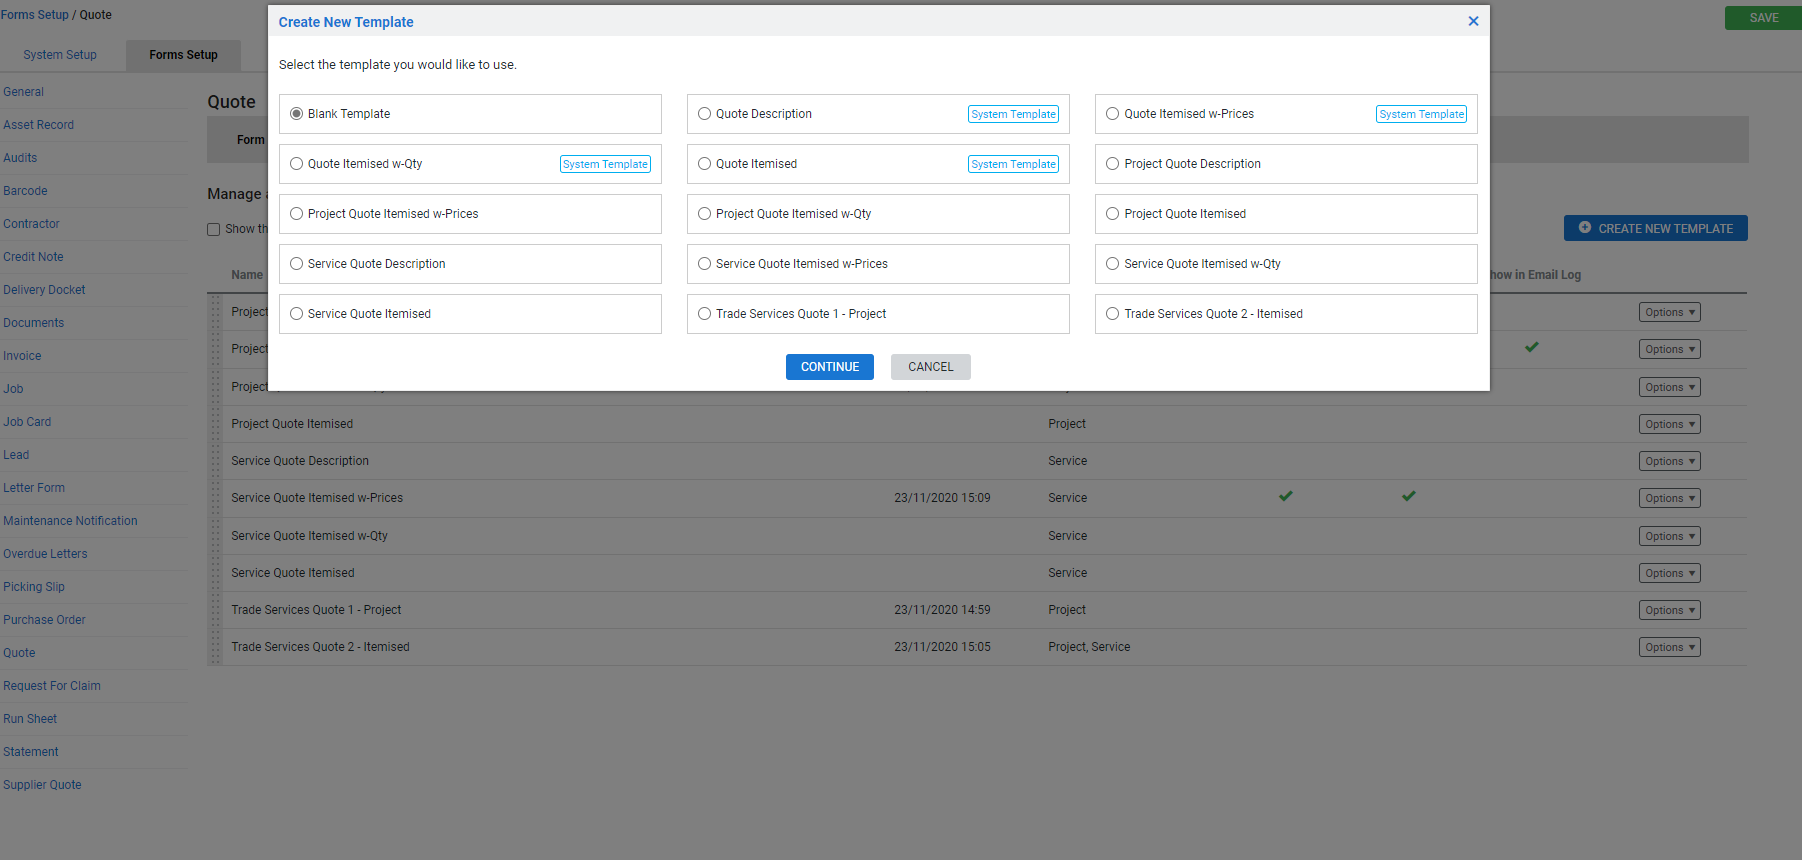 A screenshot of the templates available for form builder.